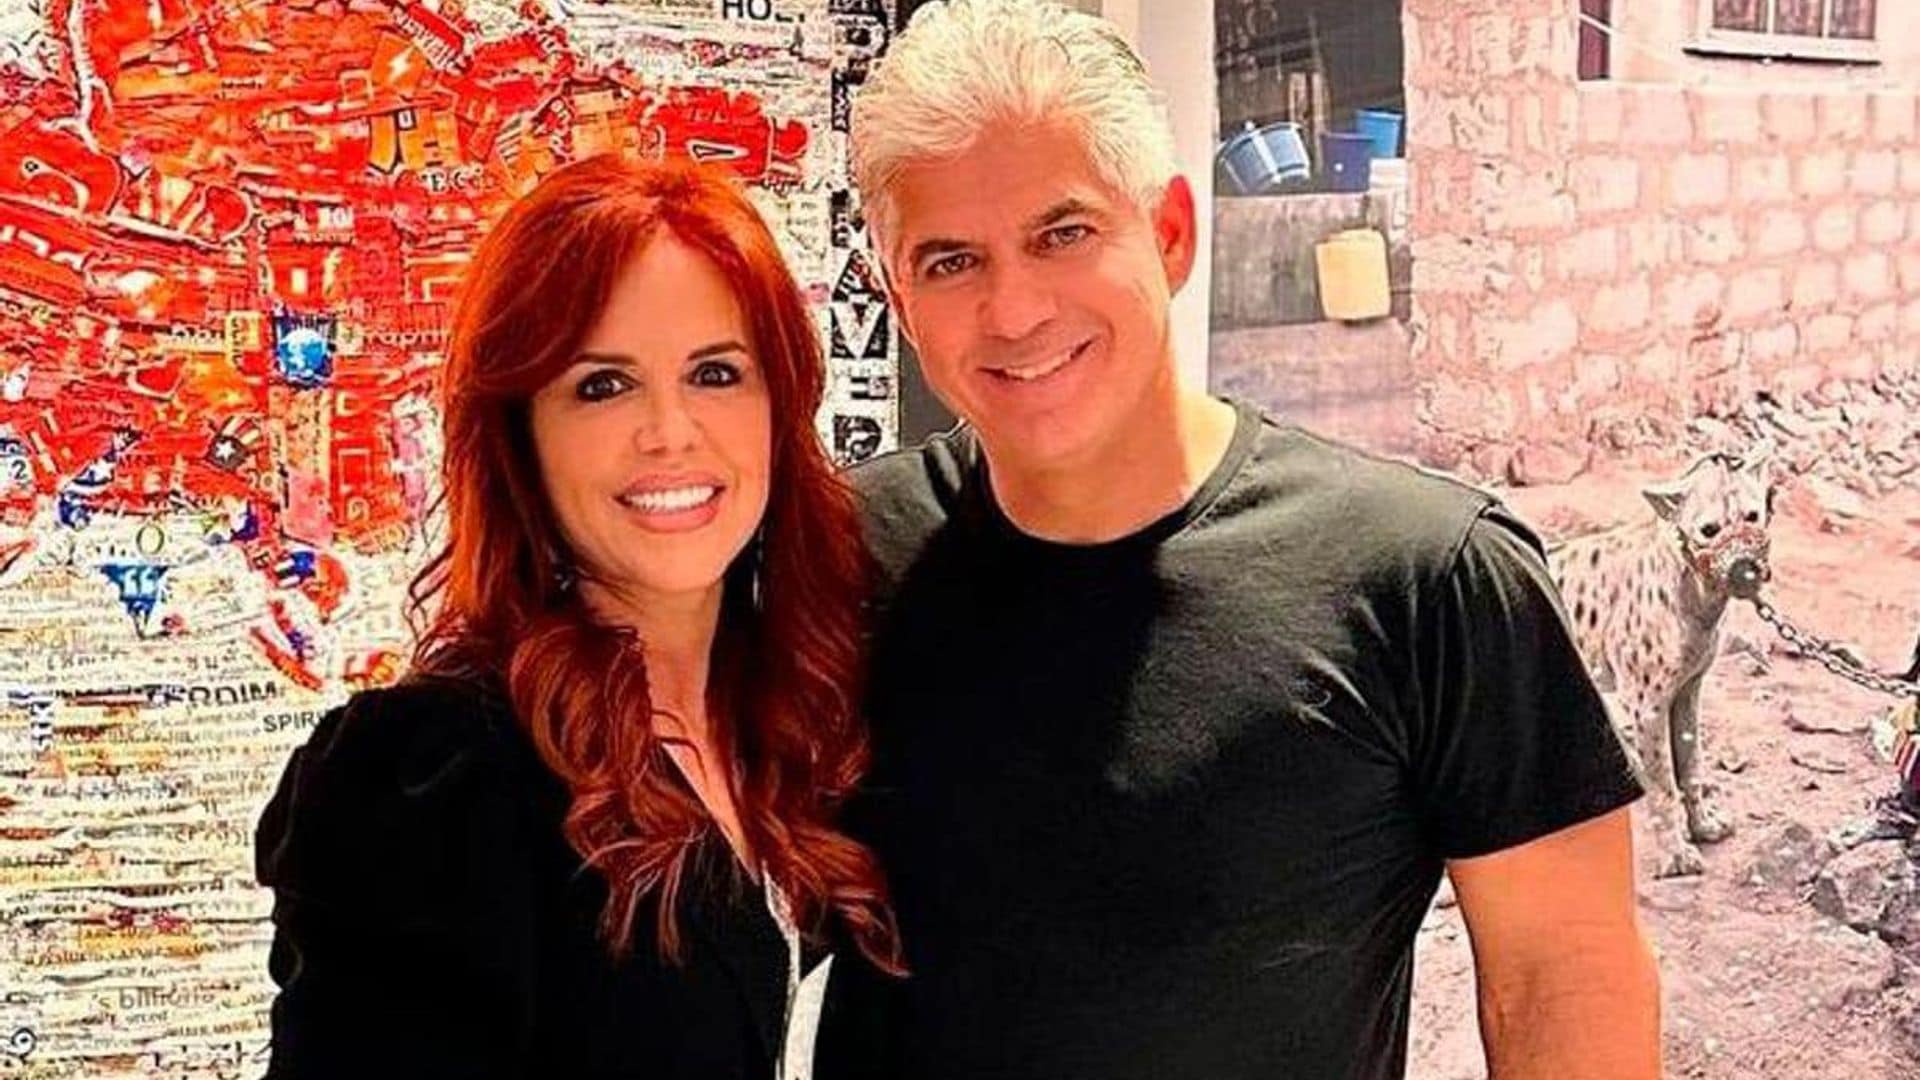 María Celeste Arrarás mourns the sudden loss of her partner: ‘It’s difficult to assimilate’